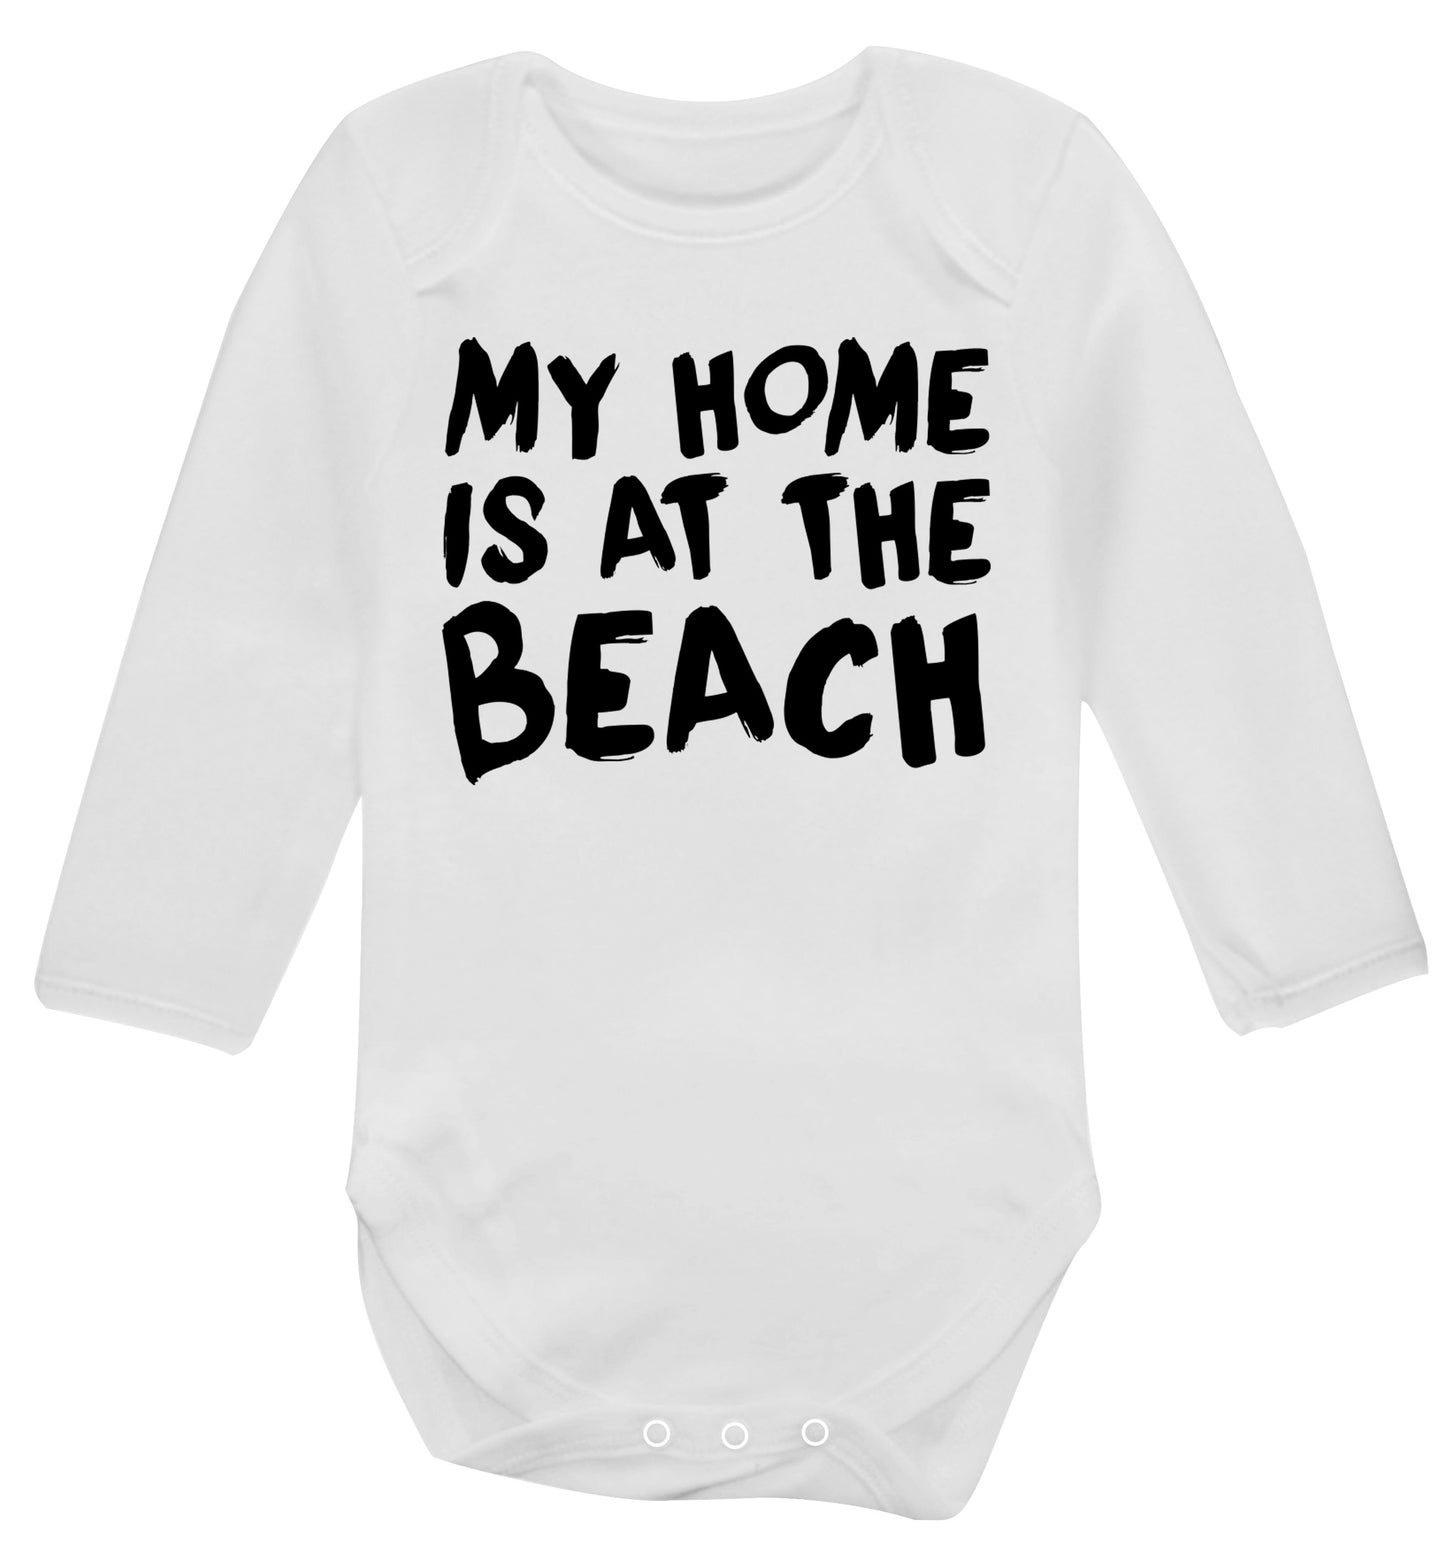 My home is at the beach Baby Vest long sleeved white 6-12 months